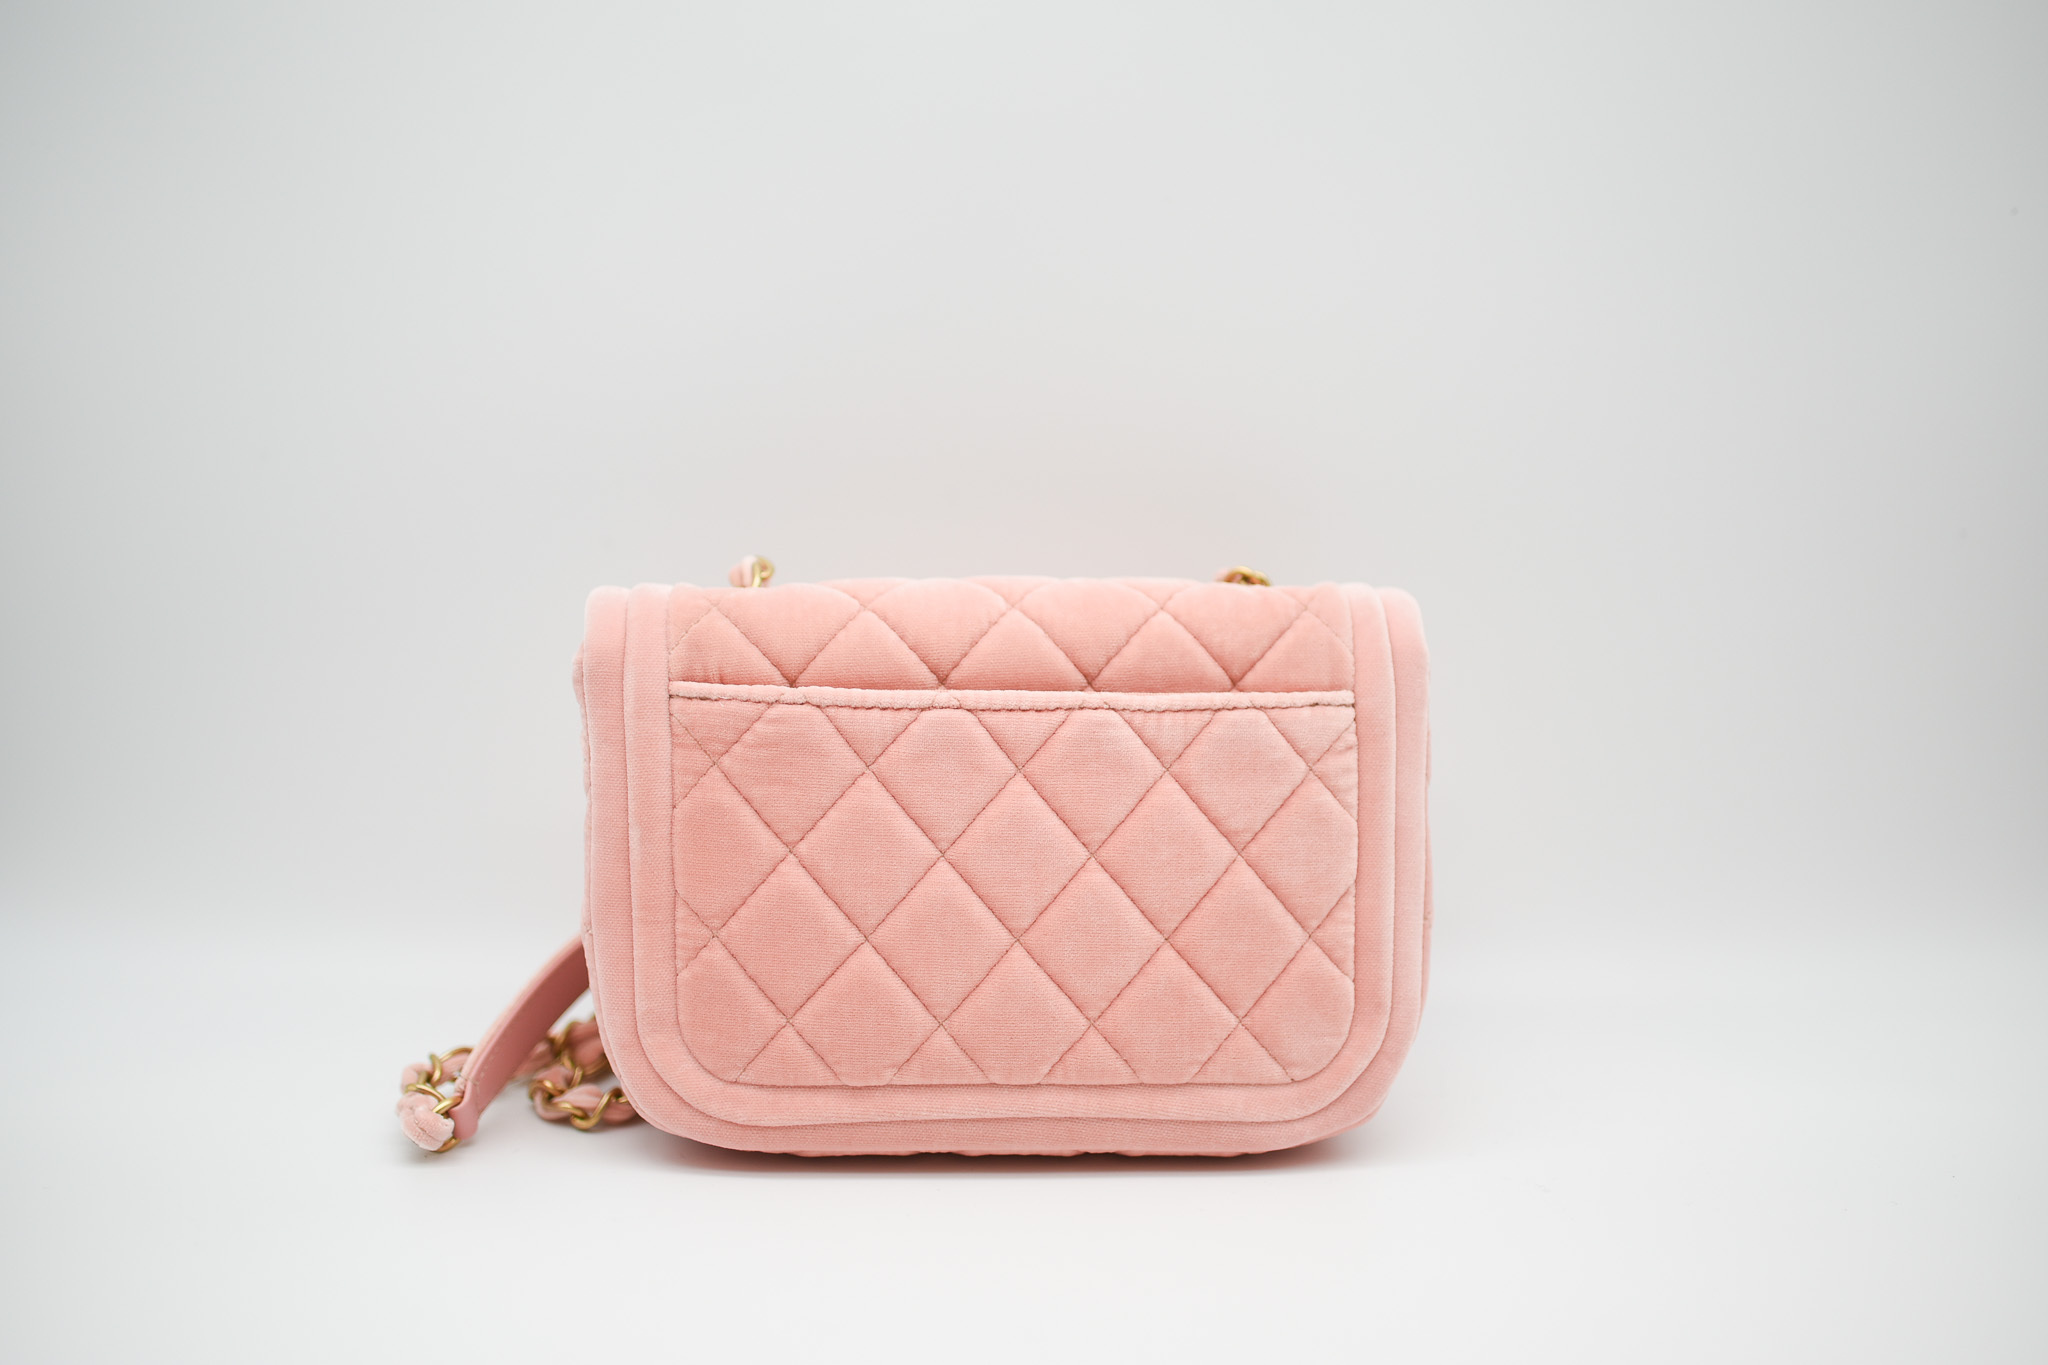 Chanel Flap 21S Coral Terry Bag, Like New in Dustbag - Julia Rose Boston